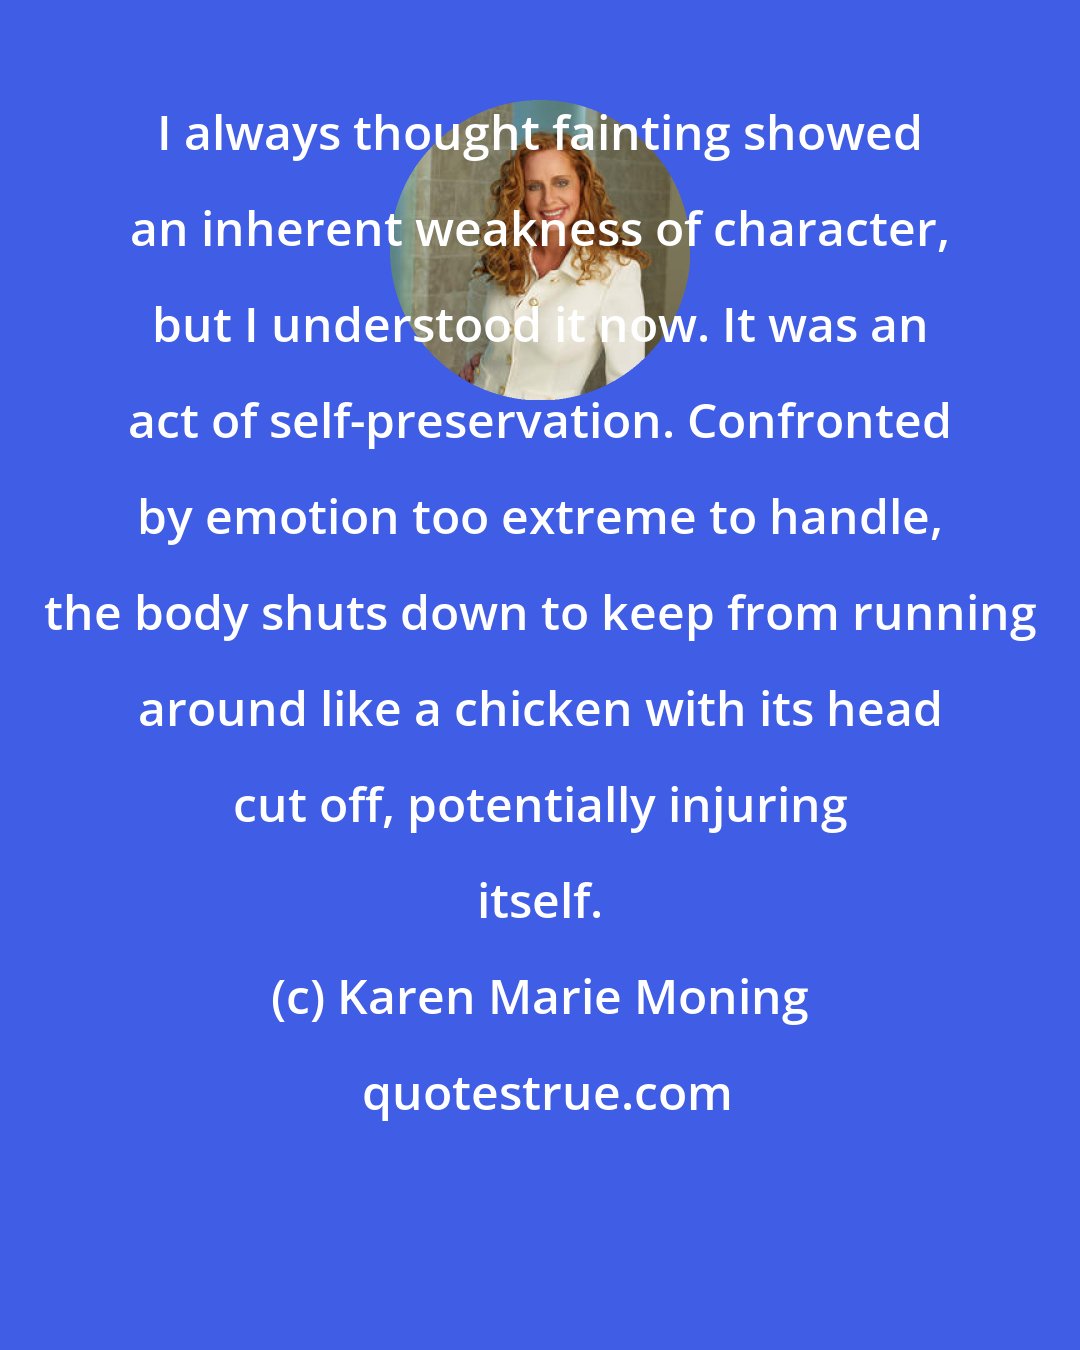 Karen Marie Moning: I always thought fainting showed an inherent weakness of character, but I understood it now. It was an act of self-preservation. Confronted by emotion too extreme to handle, the body shuts down to keep from running around like a chicken with its head cut off, potentially injuring itself.